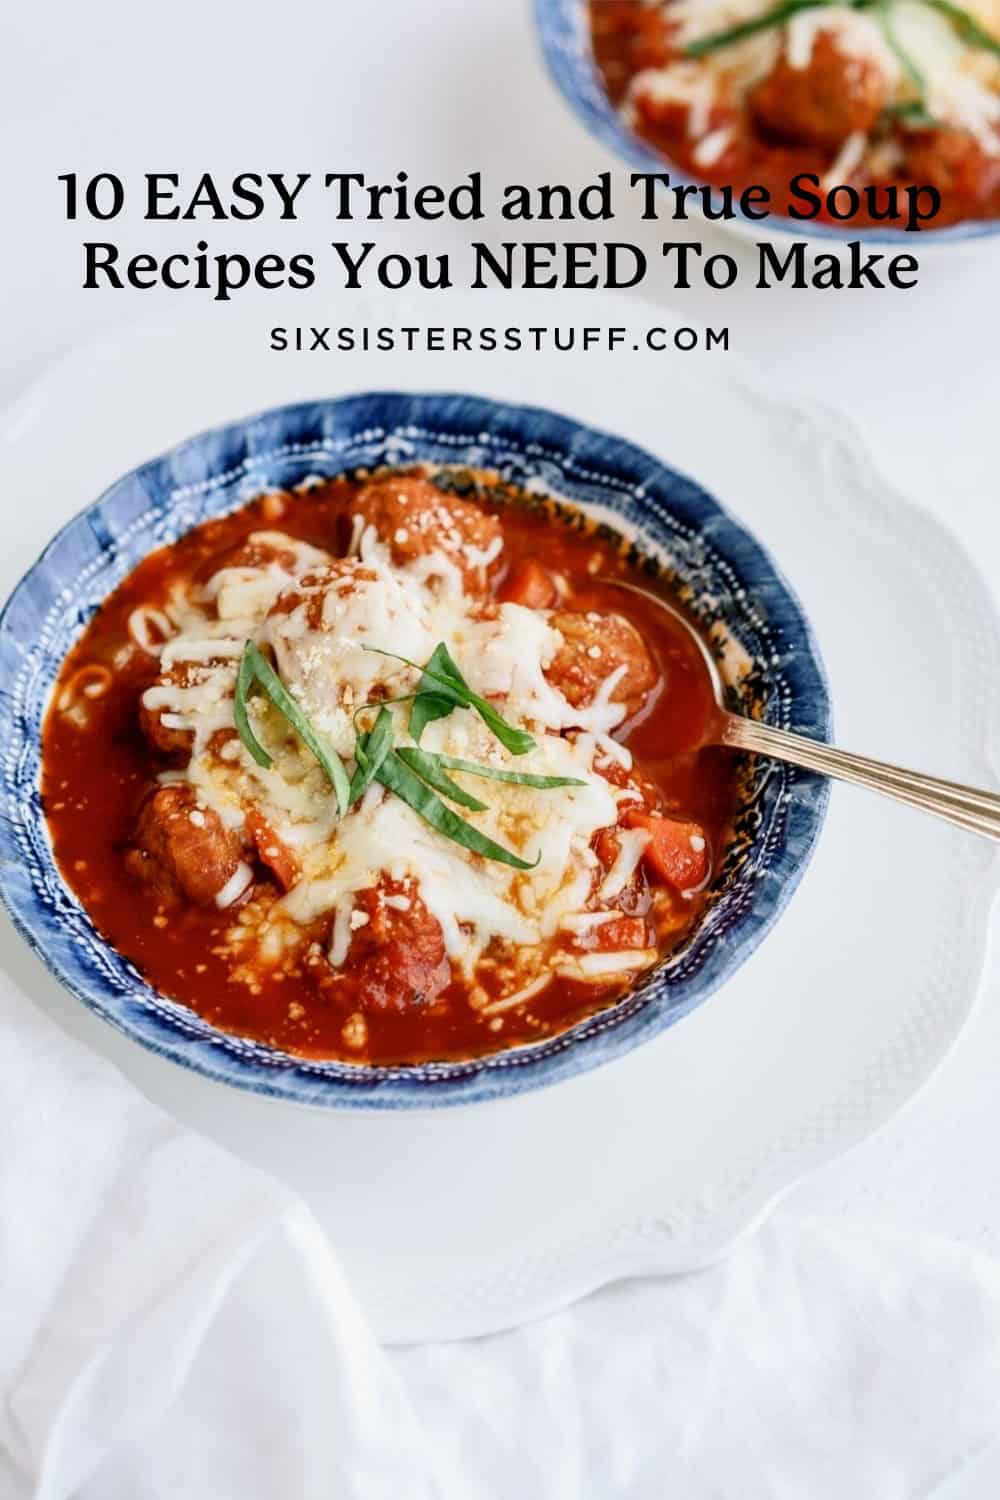 10 EASY Tried and True Soup Recipes You NEED To Make